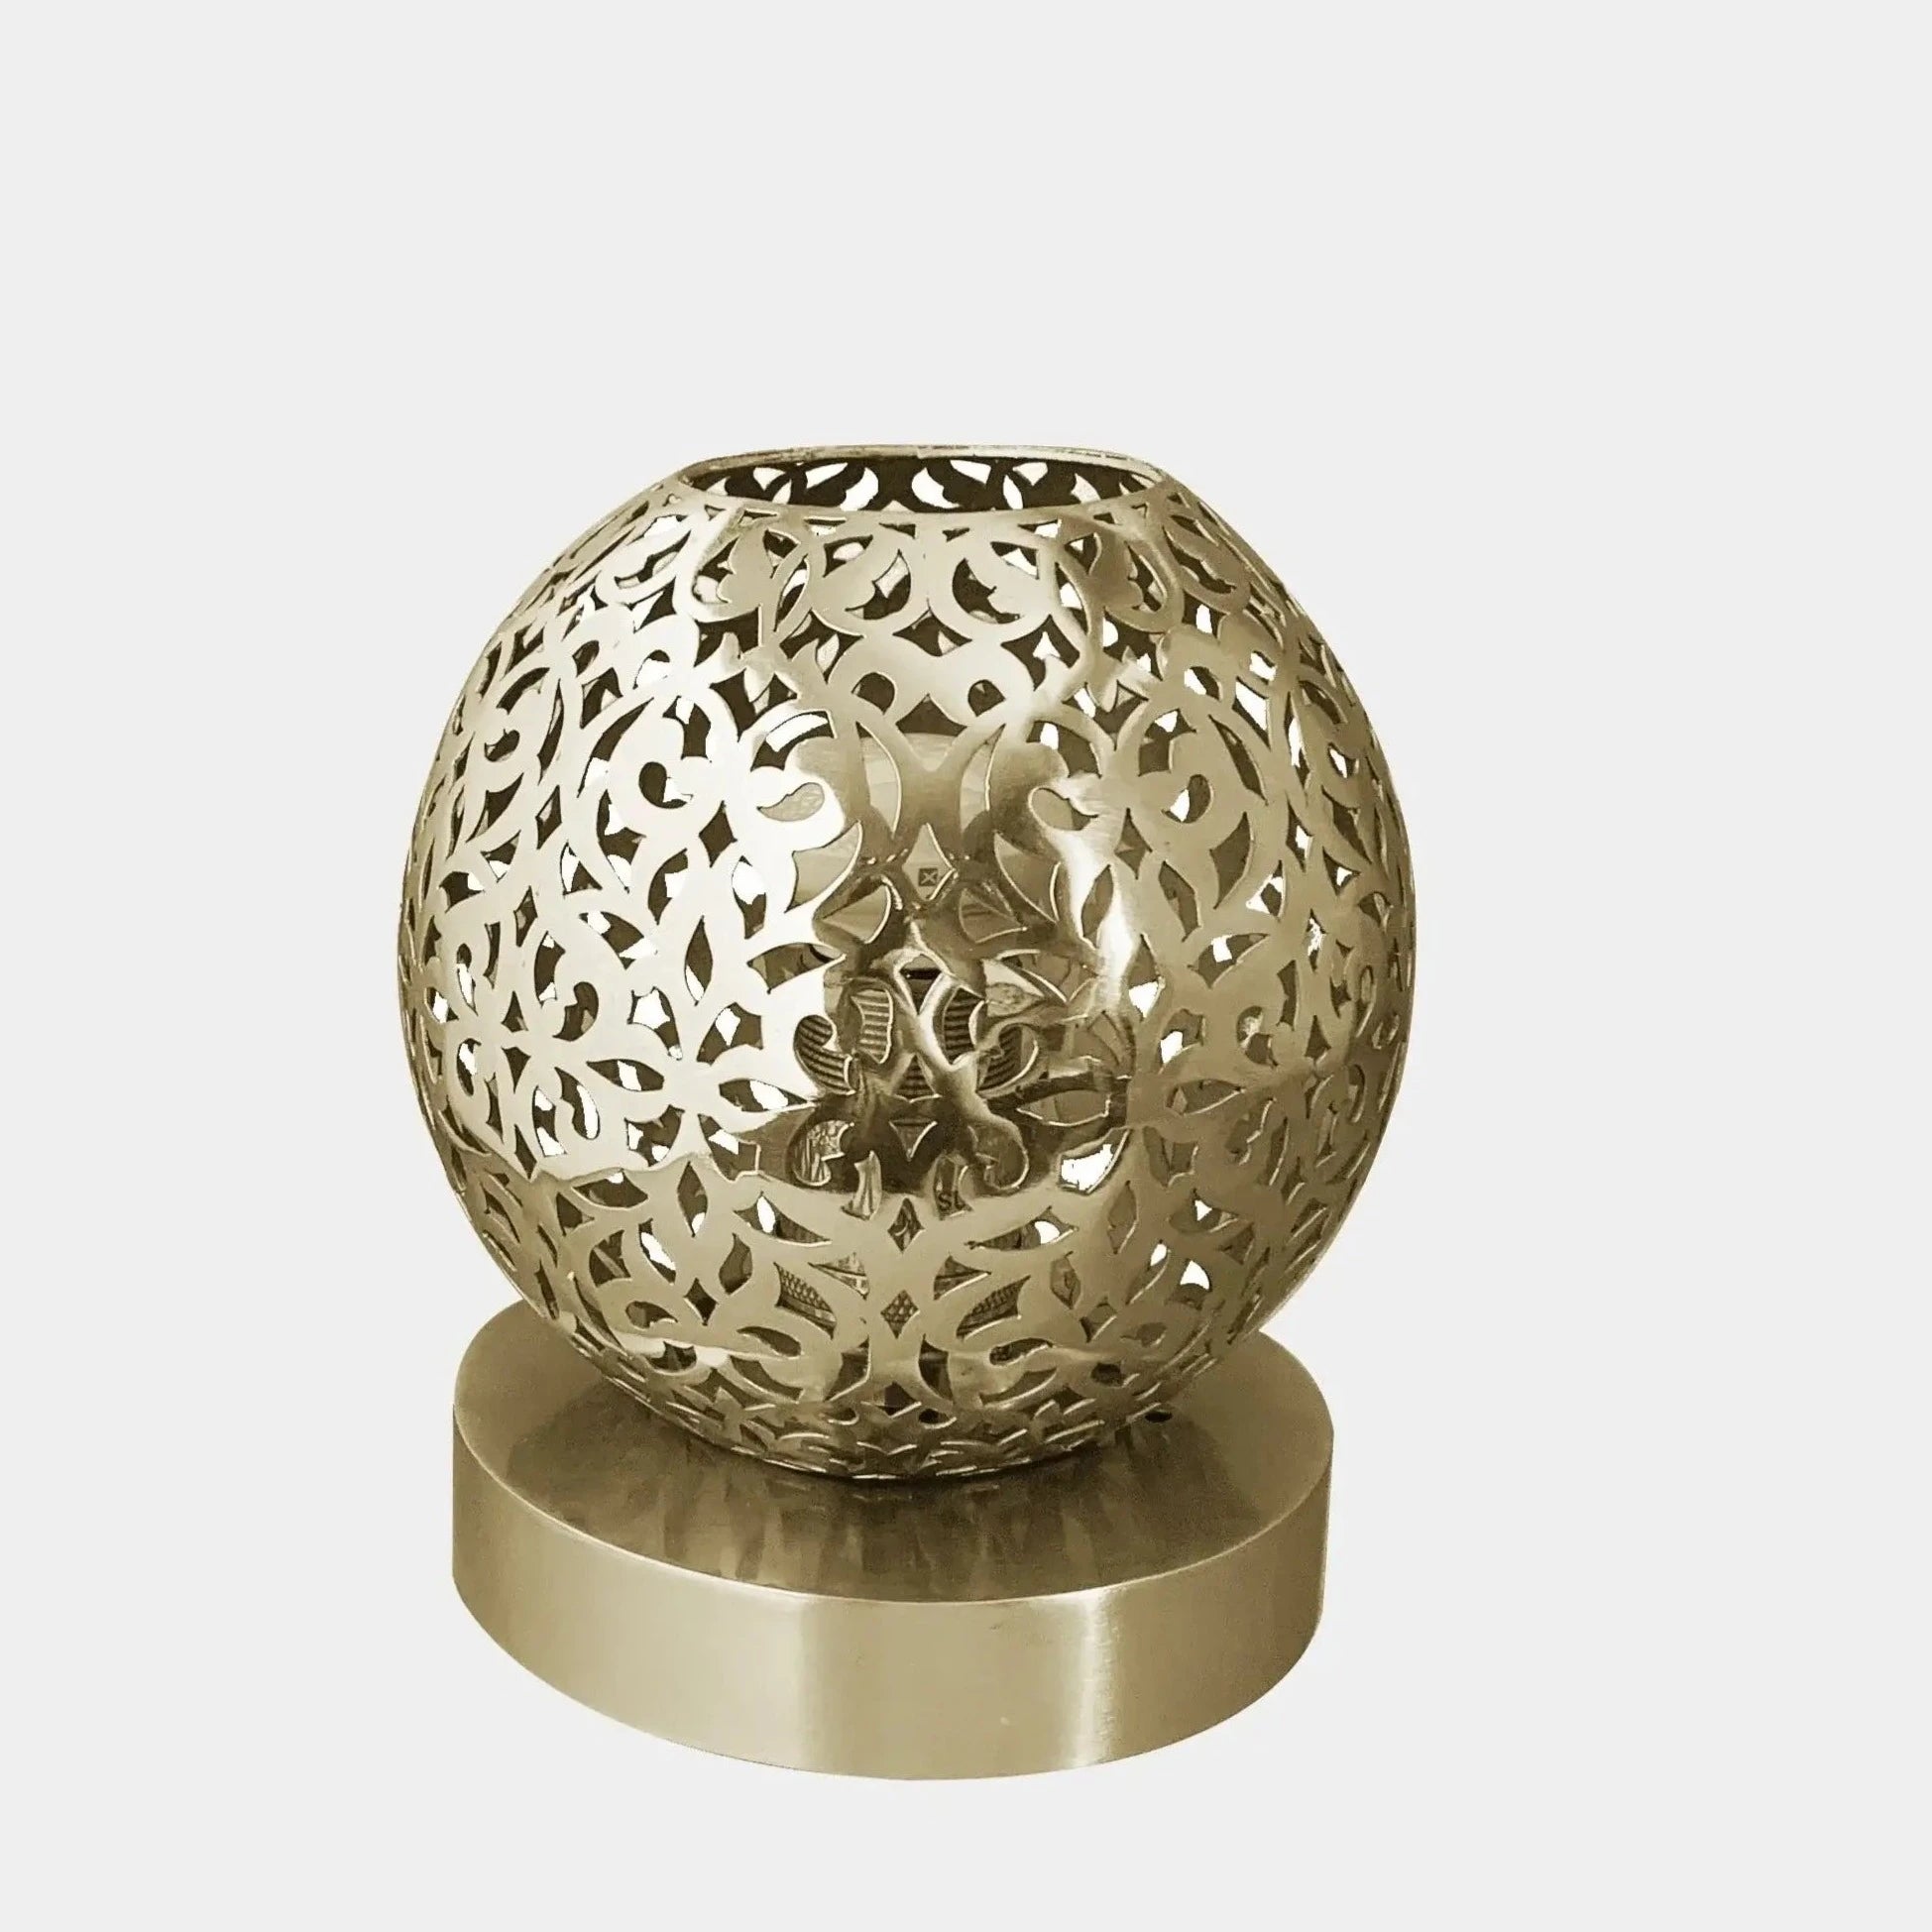 Dounia home Table lamp innickel silver   made of Metal, Model: Riad